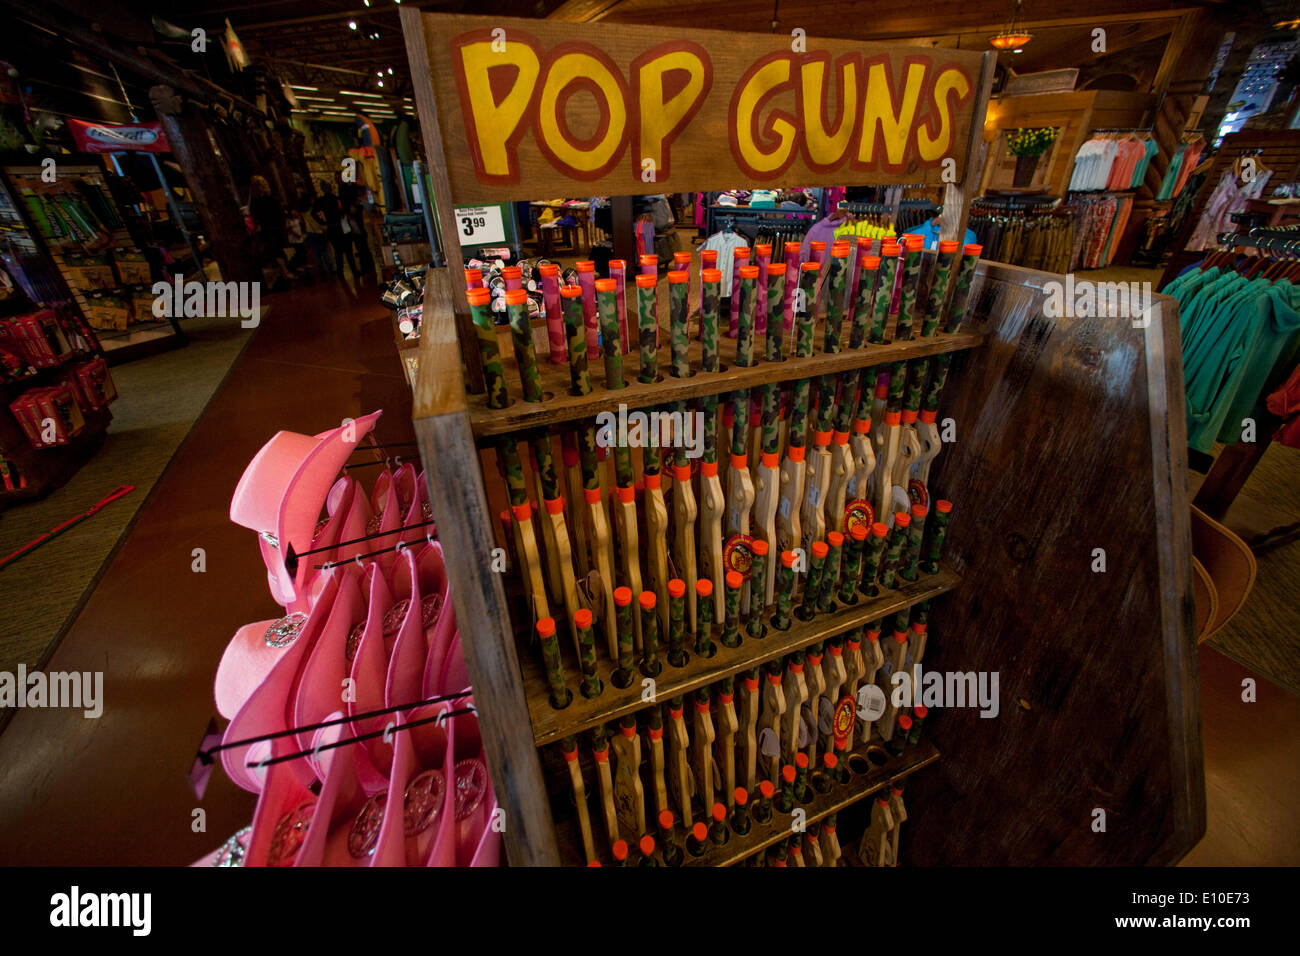 May 18, 2014 - Riverside, California, U.S. - Wooden toy pop guns for kids on sale beside pink cowgirl stetson hats in a large Bass Pro Shops store in Riverside. Bass Pro Shops (Outdoor World) is a privately held retailer of hunting, fishing, camping and related outdoor recreation merchandise. Bass Pro Shops is known for a large selection of hunting, fishing, and other outdoor gear. (Credit Image: © Ruaridh Stewart/ZUMA Wire/ZUMAPRESS.com) Stock Photo